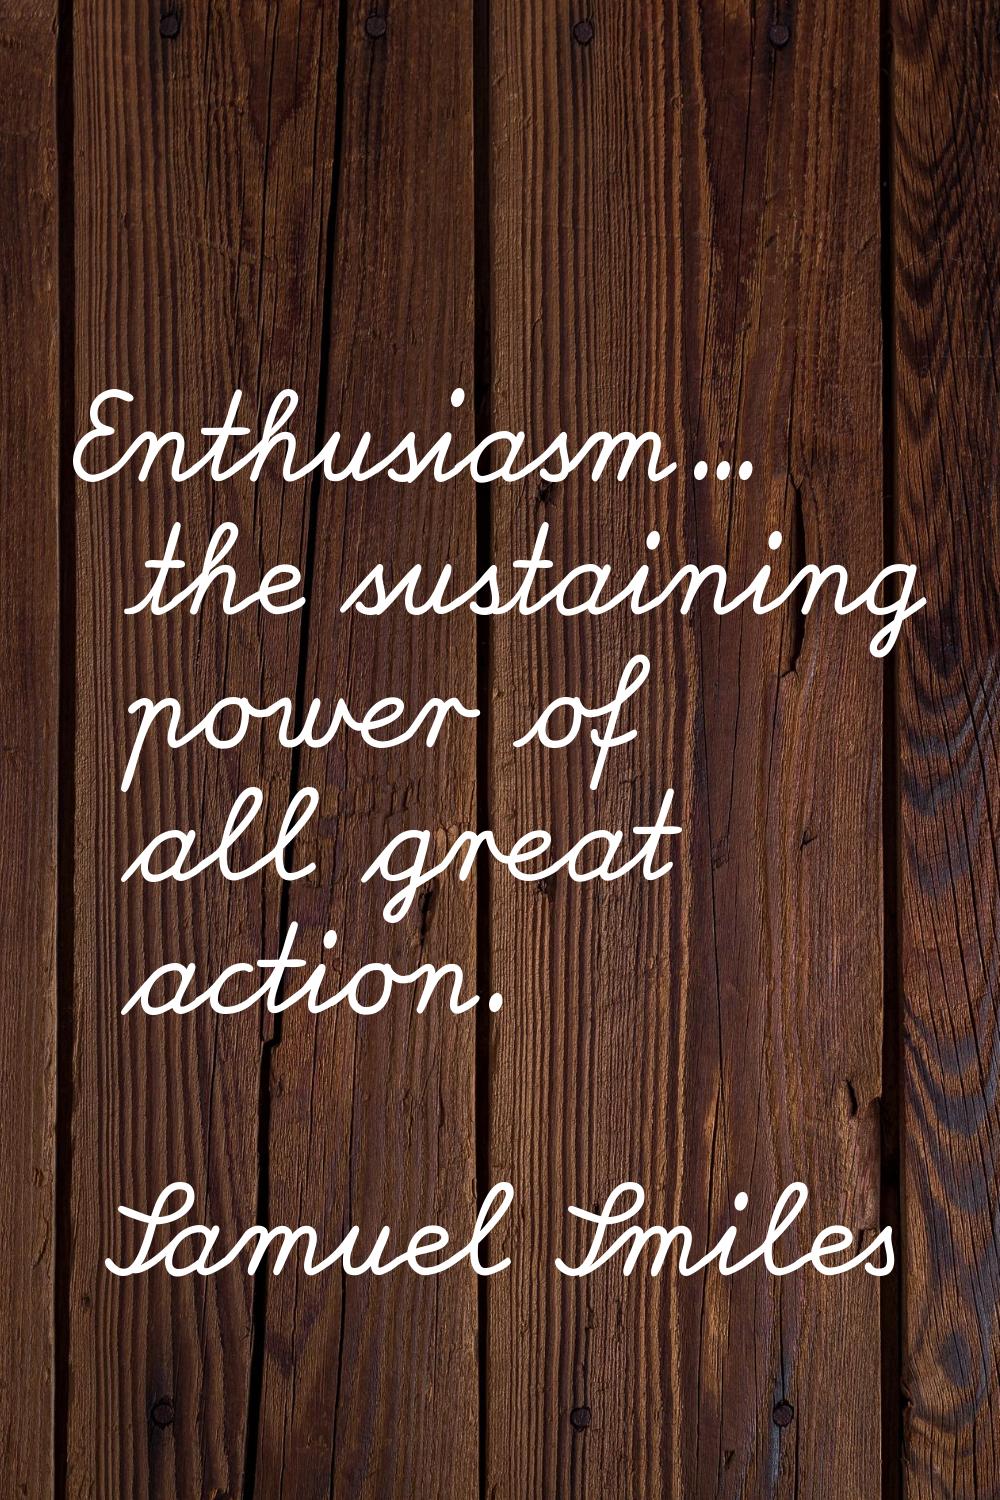 Enthusiasm... the sustaining power of all great action.